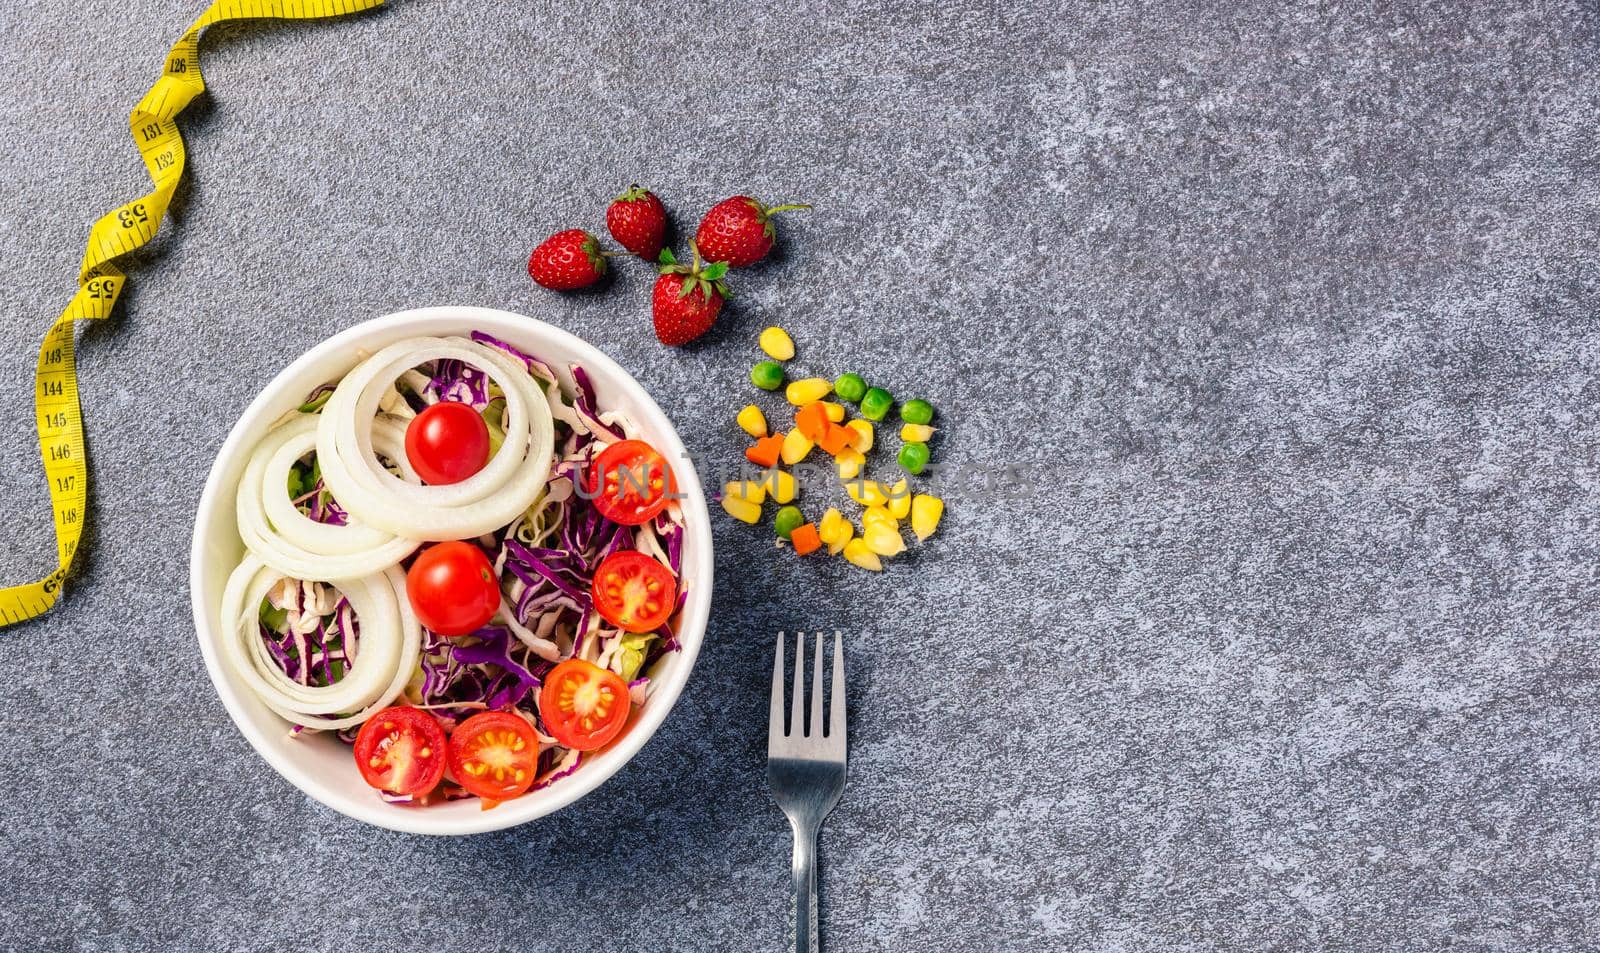 Top view of the healthy colorful salad bowl with tomatoes fresh mixed greens vegetable in a dish and measuring tape on cement background, Health salad snack diet food weight loss concept